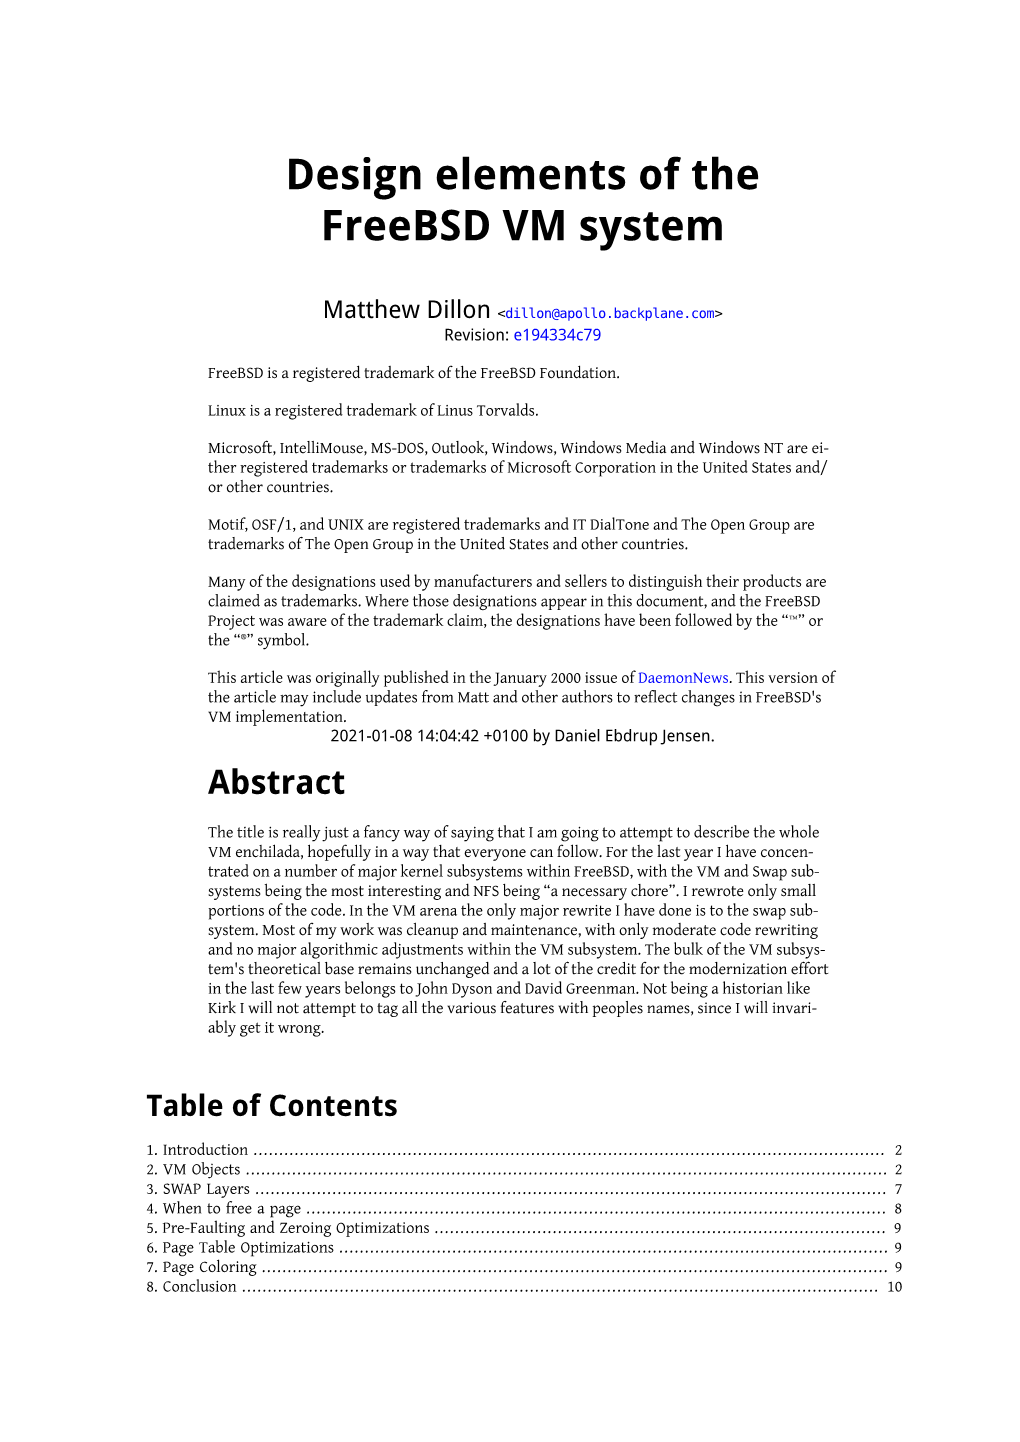 Design Elements of the Freebsd VM System